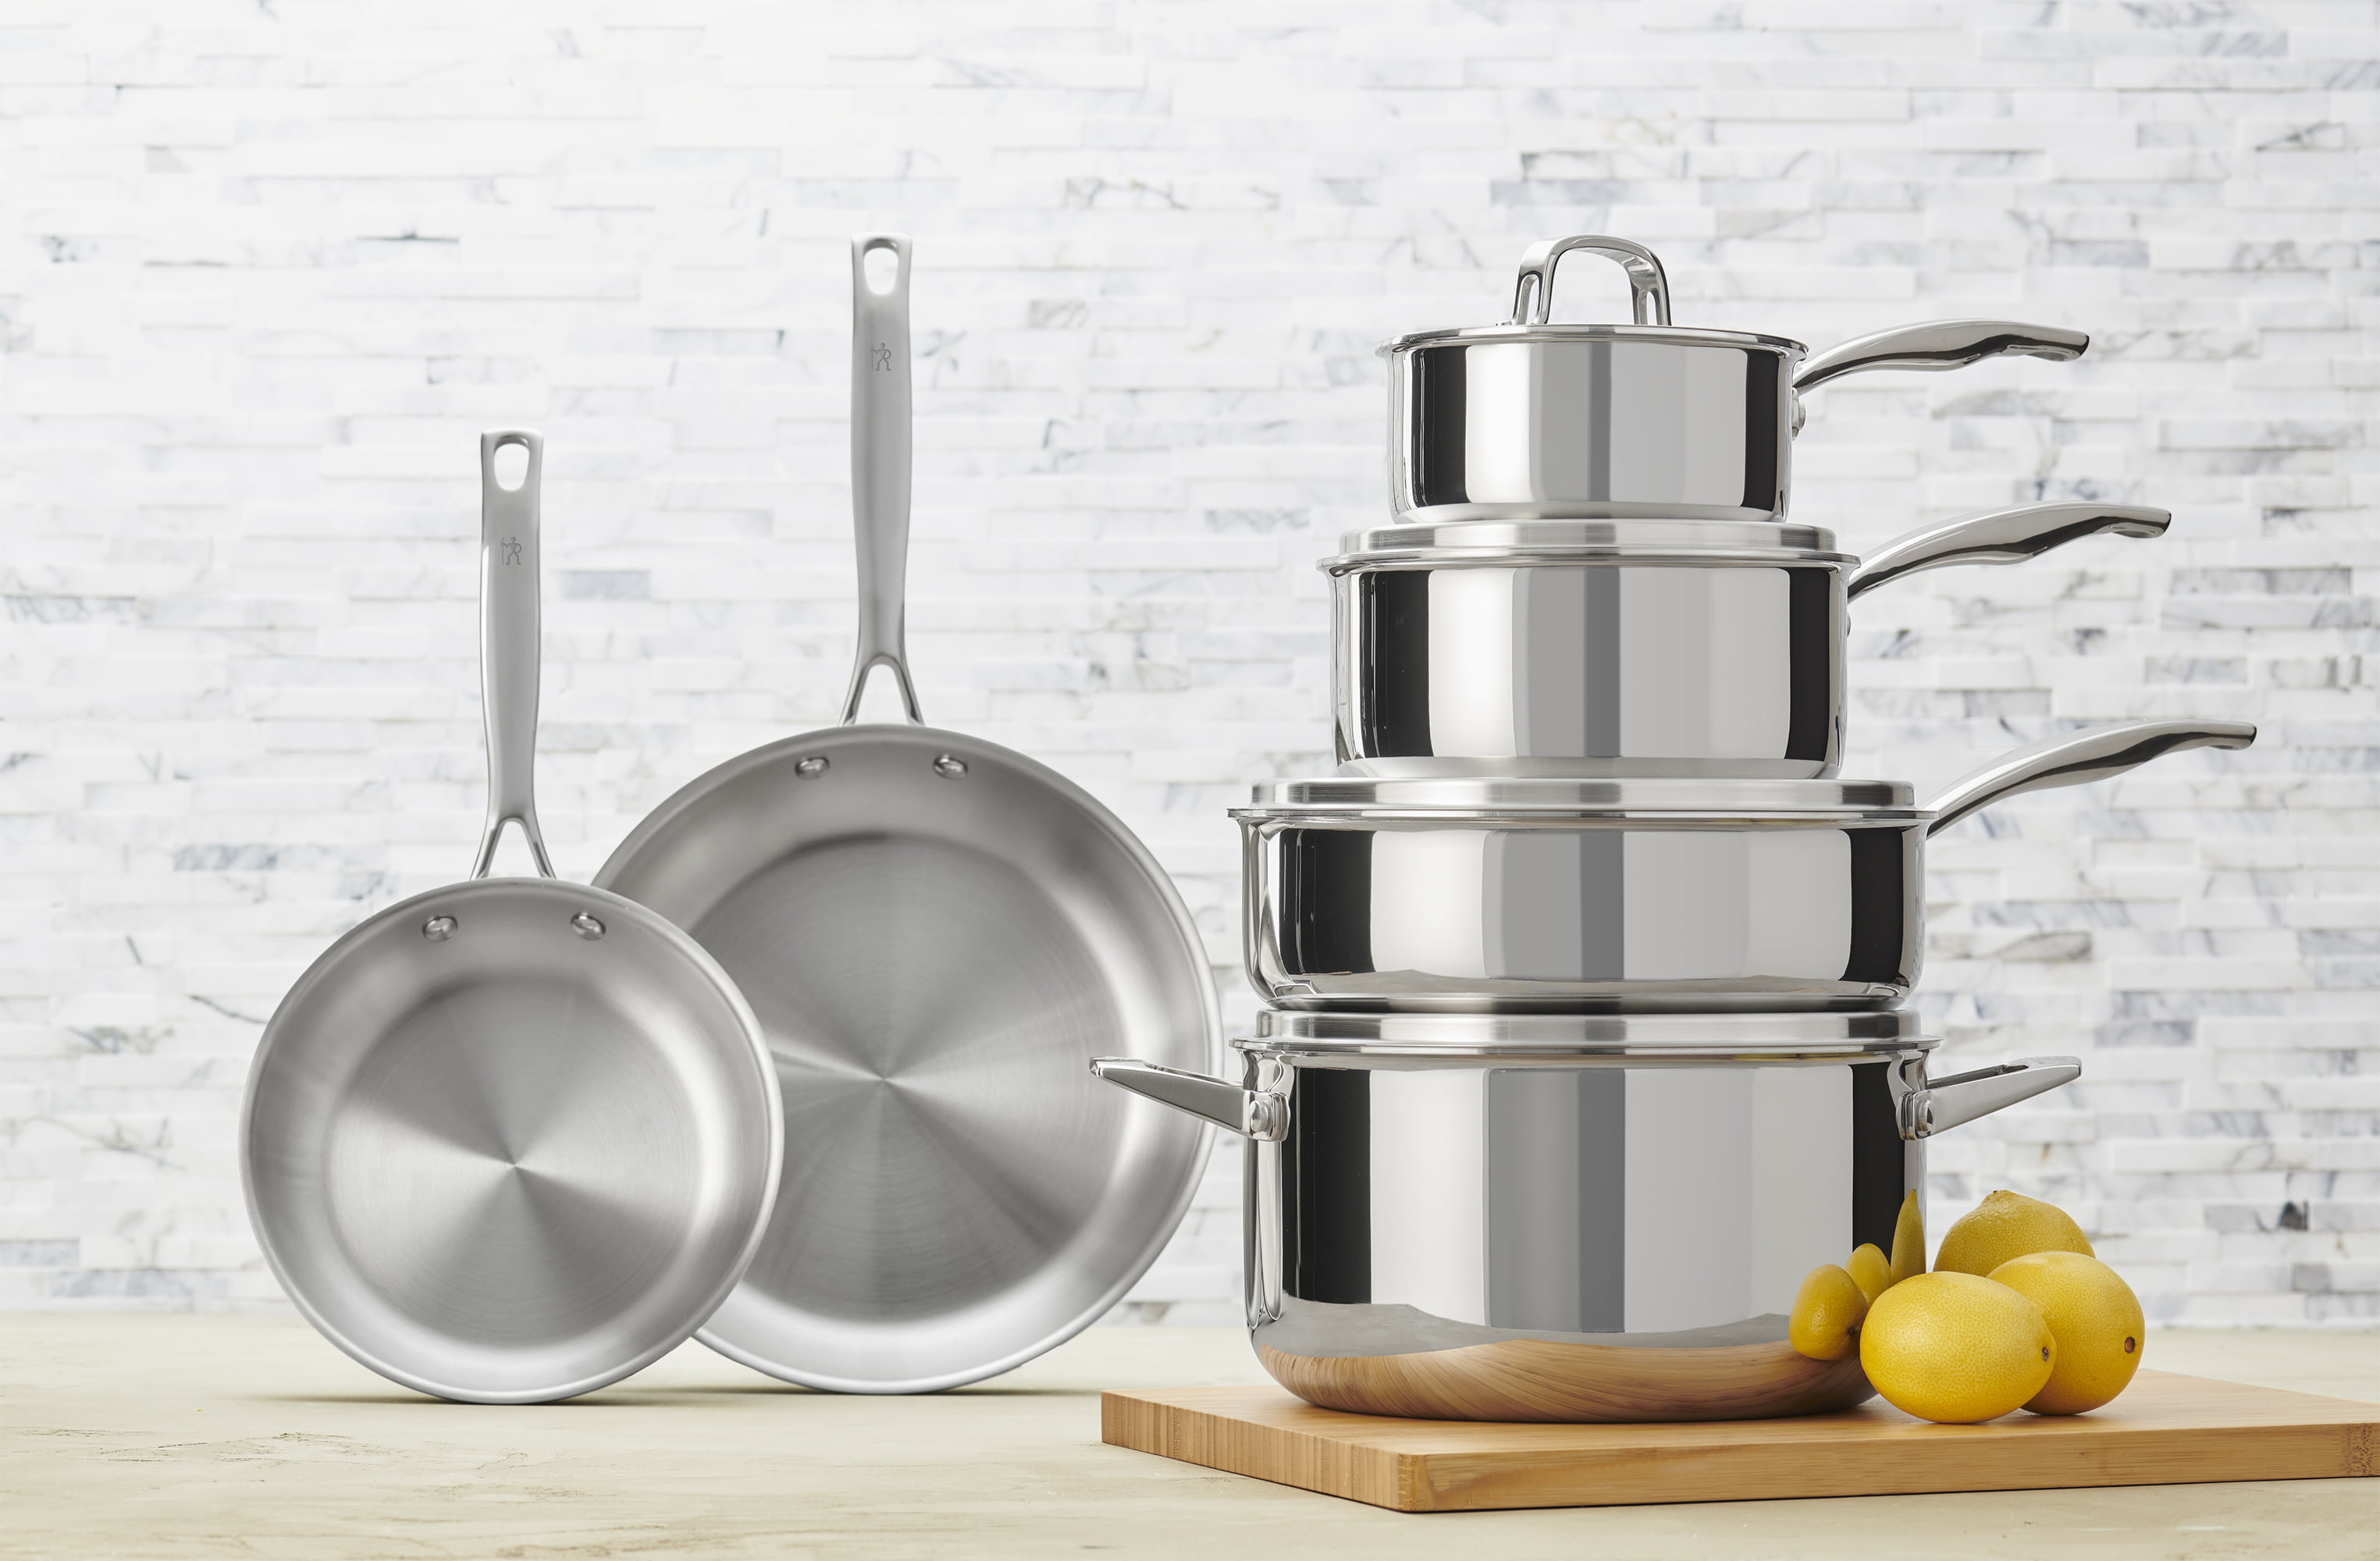 Henckels Clad H3 10-pc Stainless Steel Cookware Set, 10-pc - Kroger